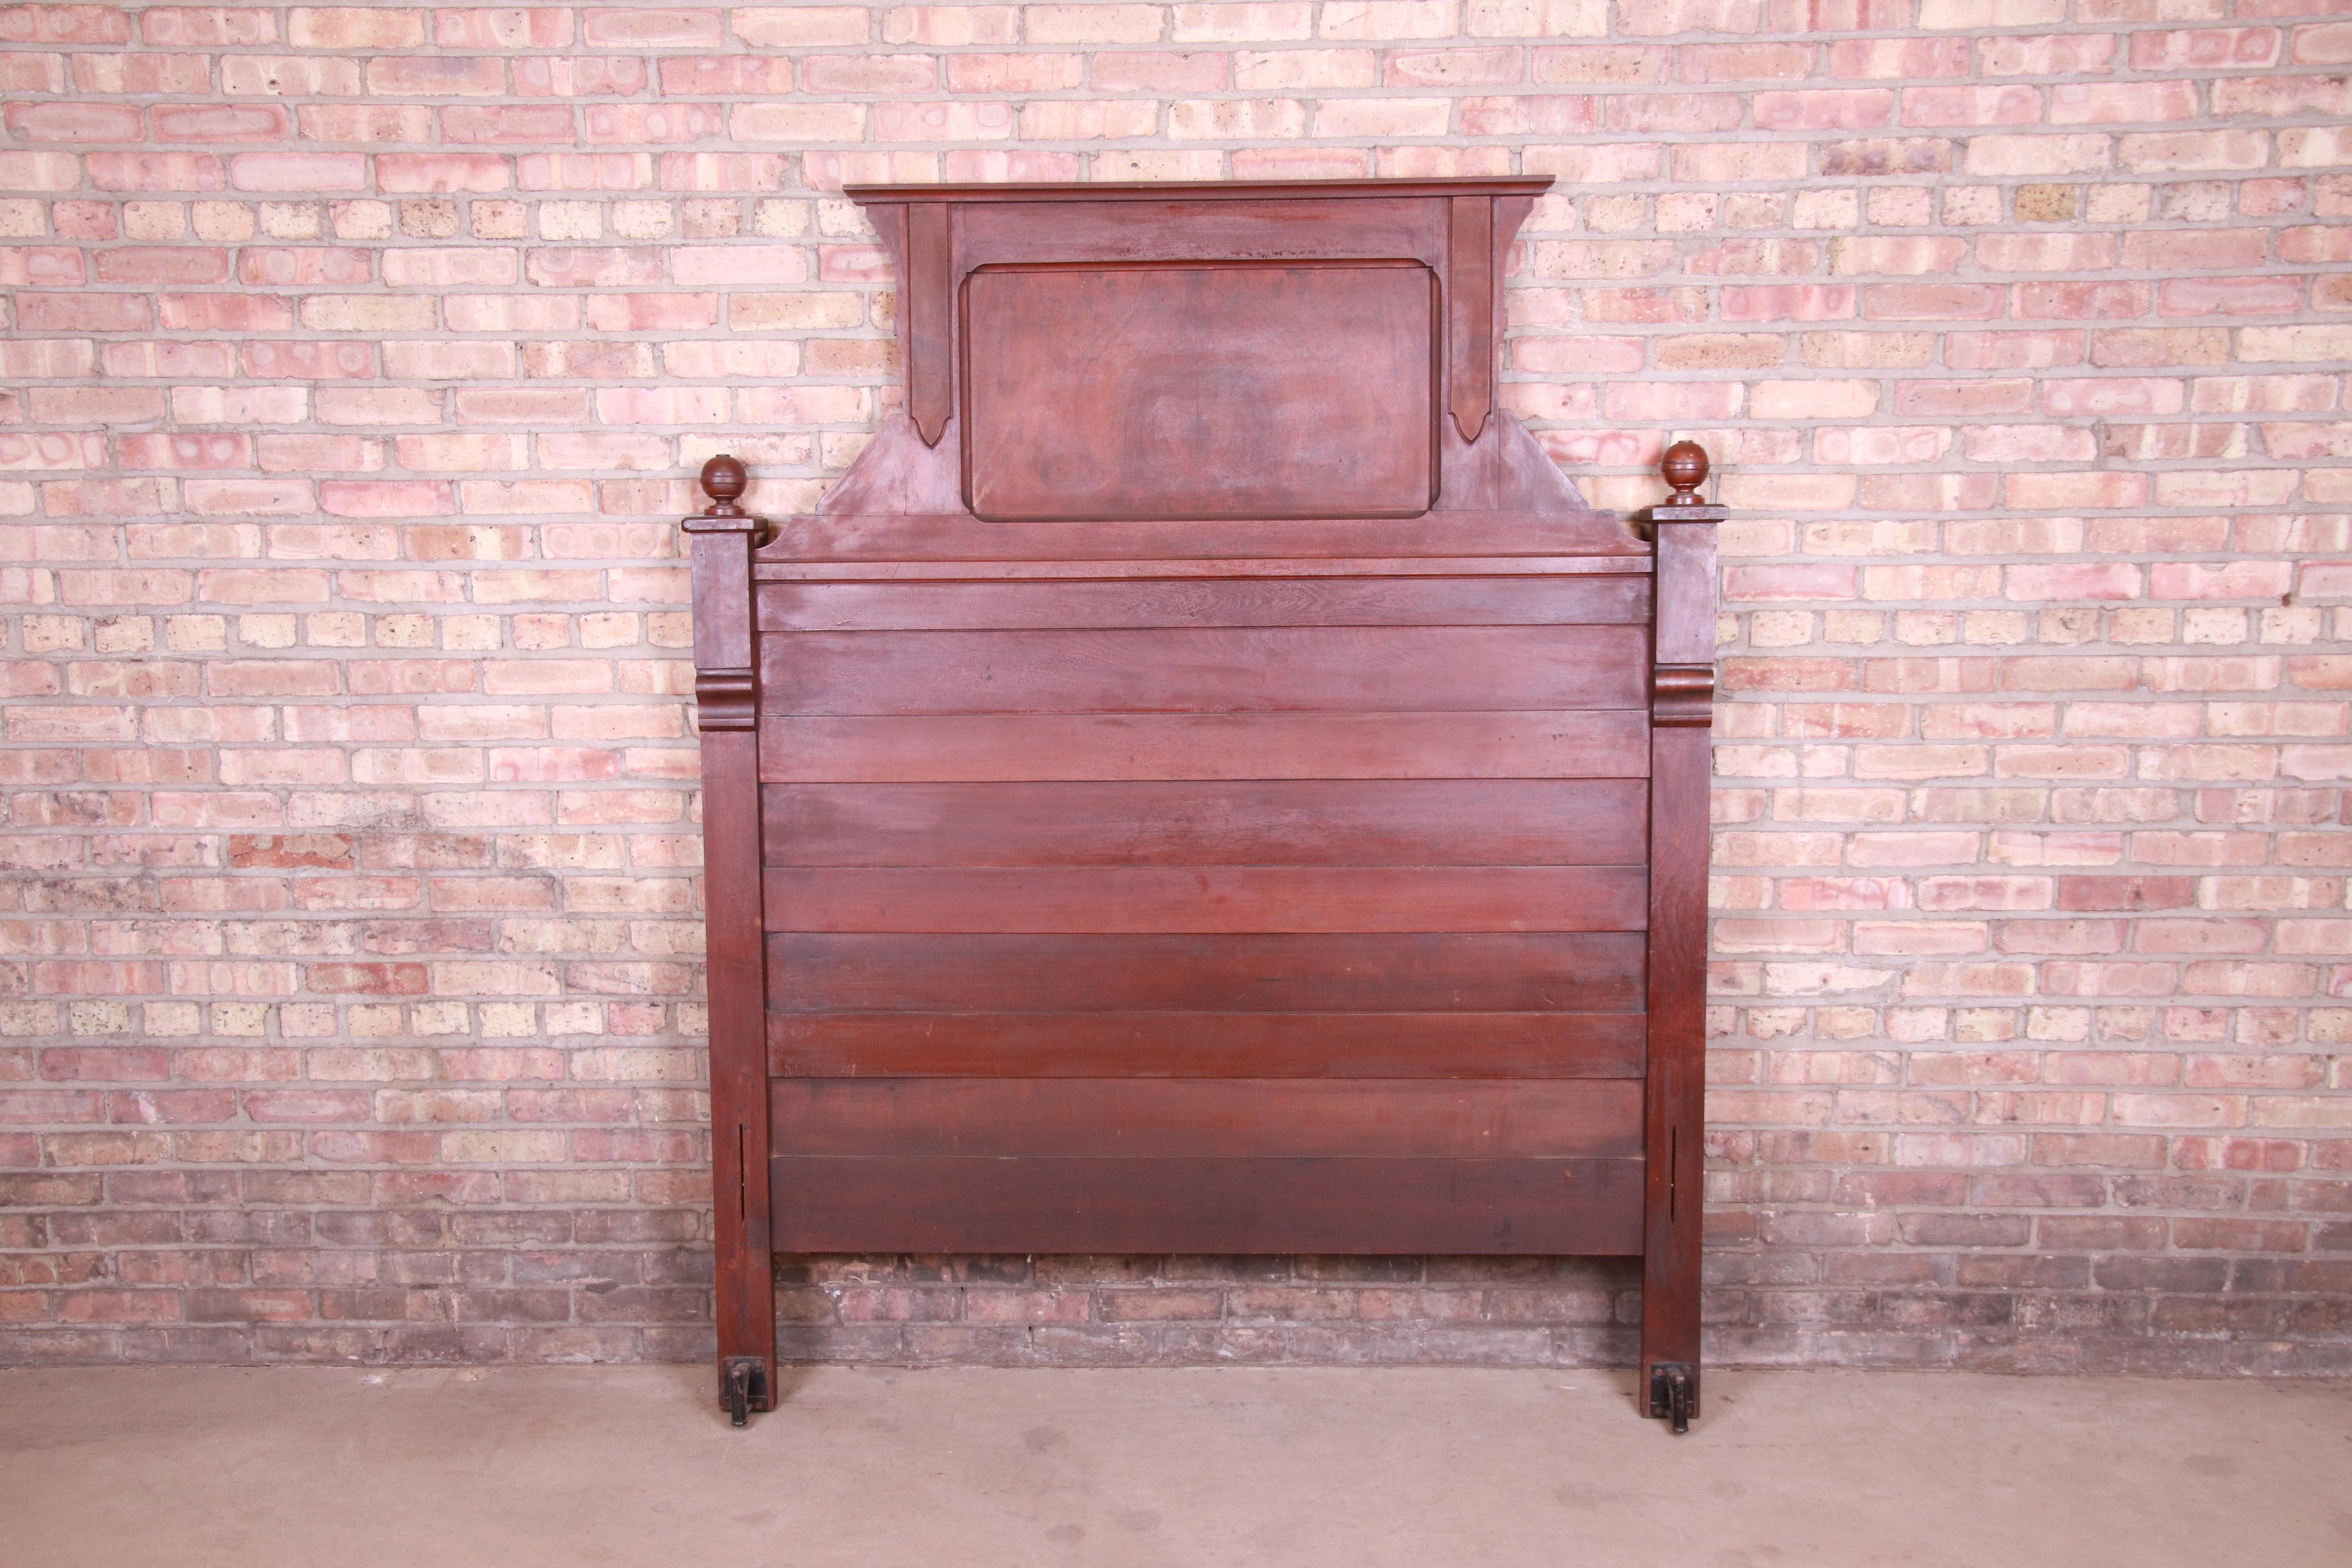 A gorgeous antique Eastlake Victorian full size tall headboard

USA, circa 1880s

Carved solid walnut, with inset burled walnut panel.

Measures: 61.13